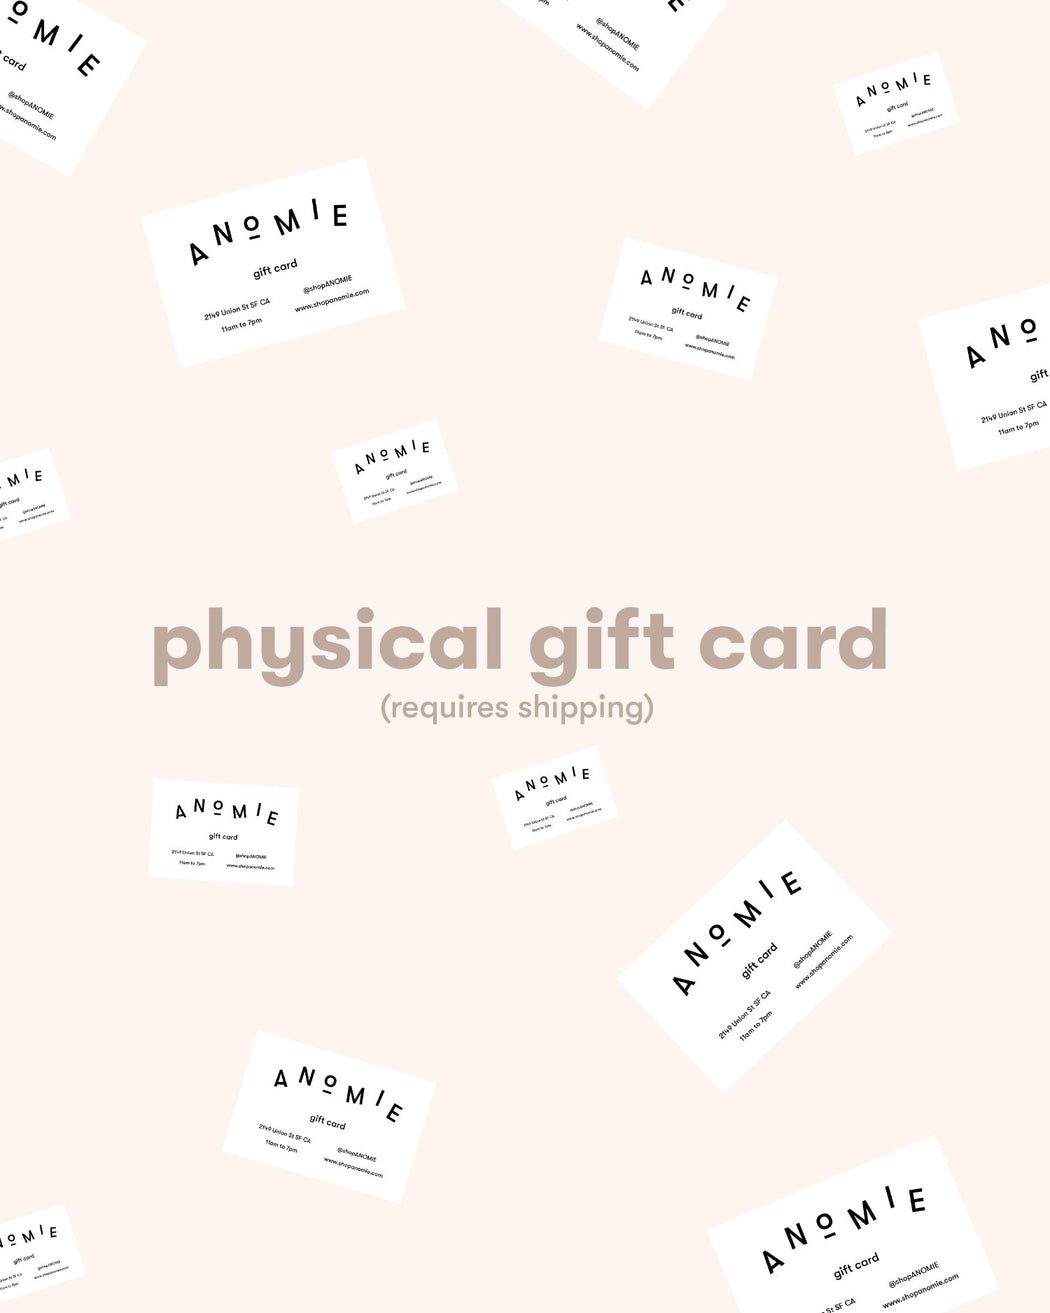 ANOMIE:Physical Gift Card,ANOMIE